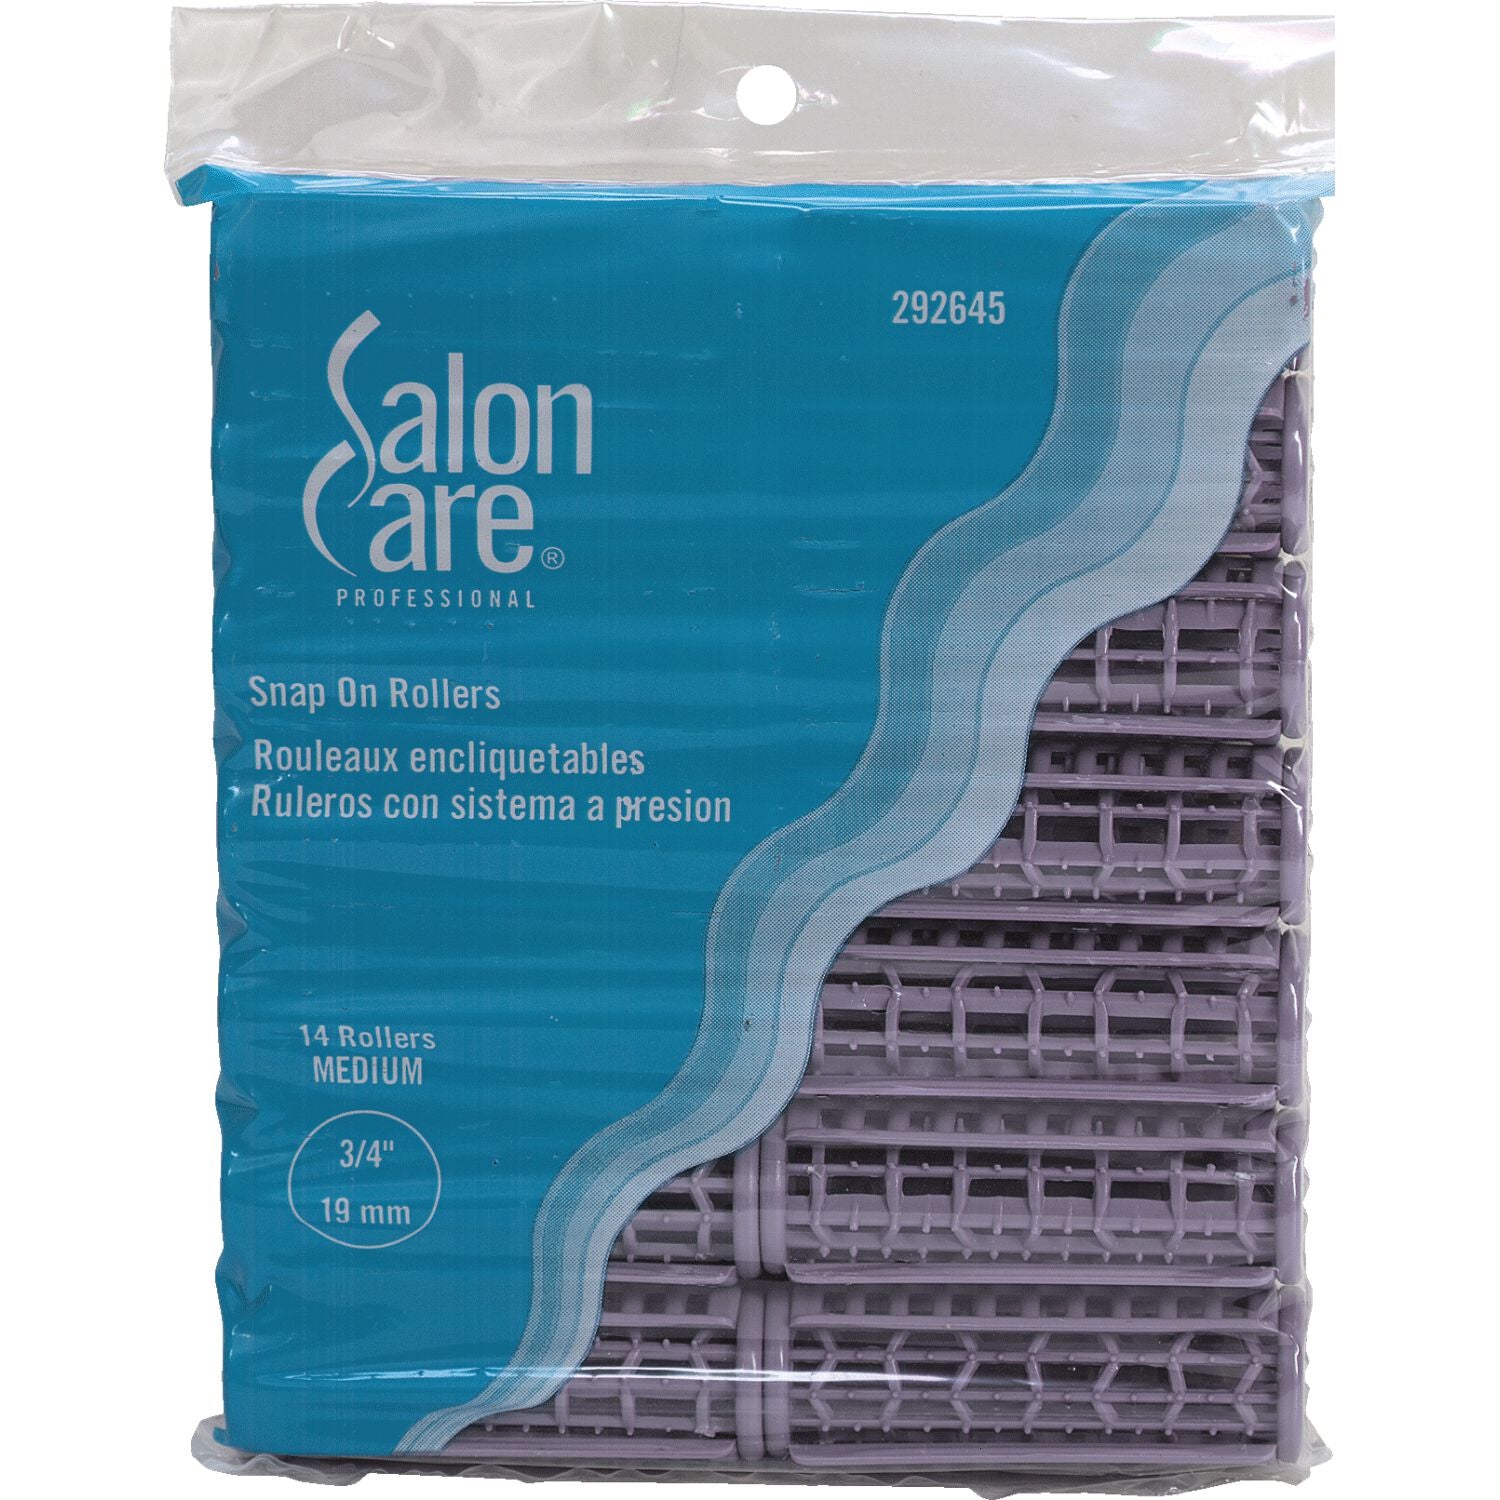 Salon Care Medium 3/4 Inch Lavender Snap-On Rollers 14 Count